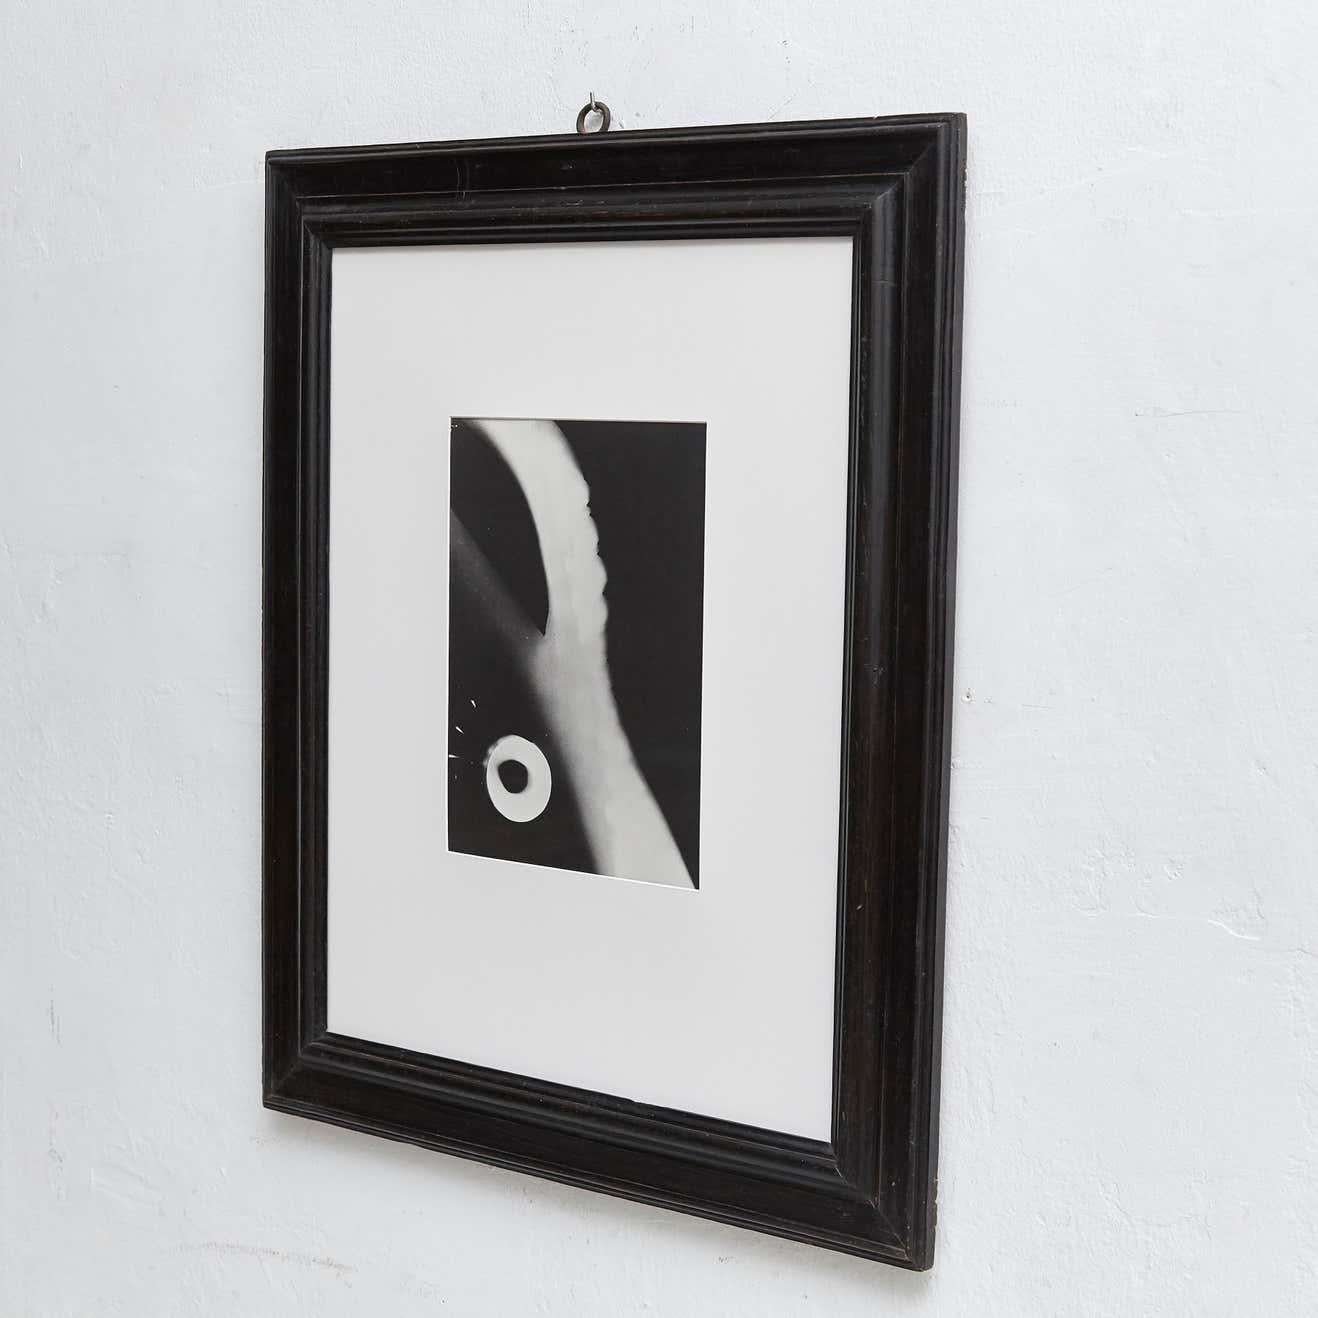 German Moholy-Nagy Black and White Photography For Sale